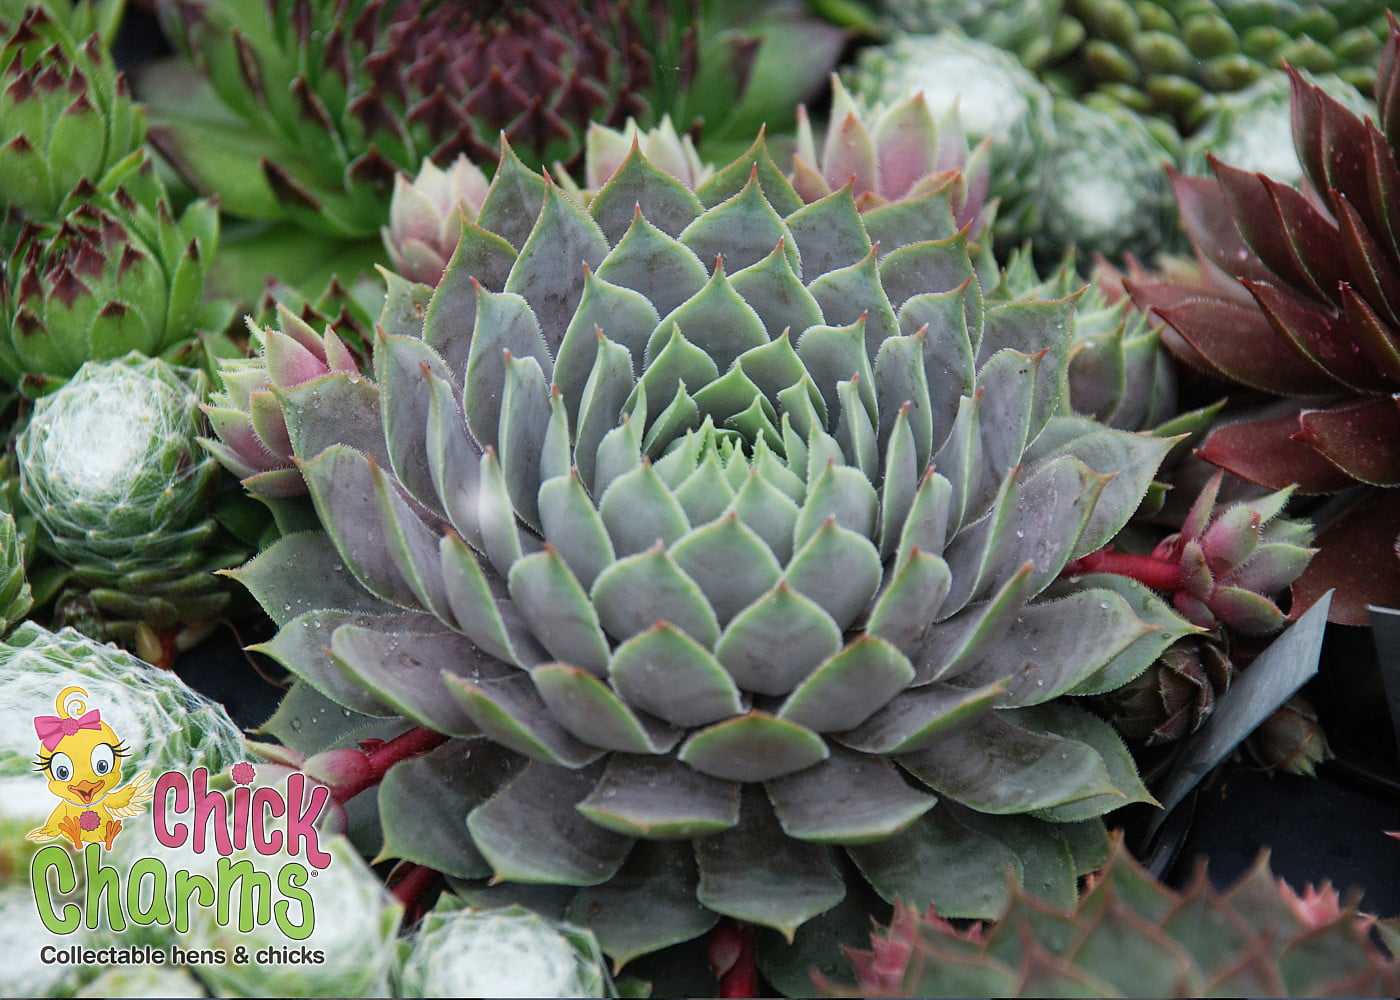 Berry Blues Chick Charms Sempervivum 5 inches